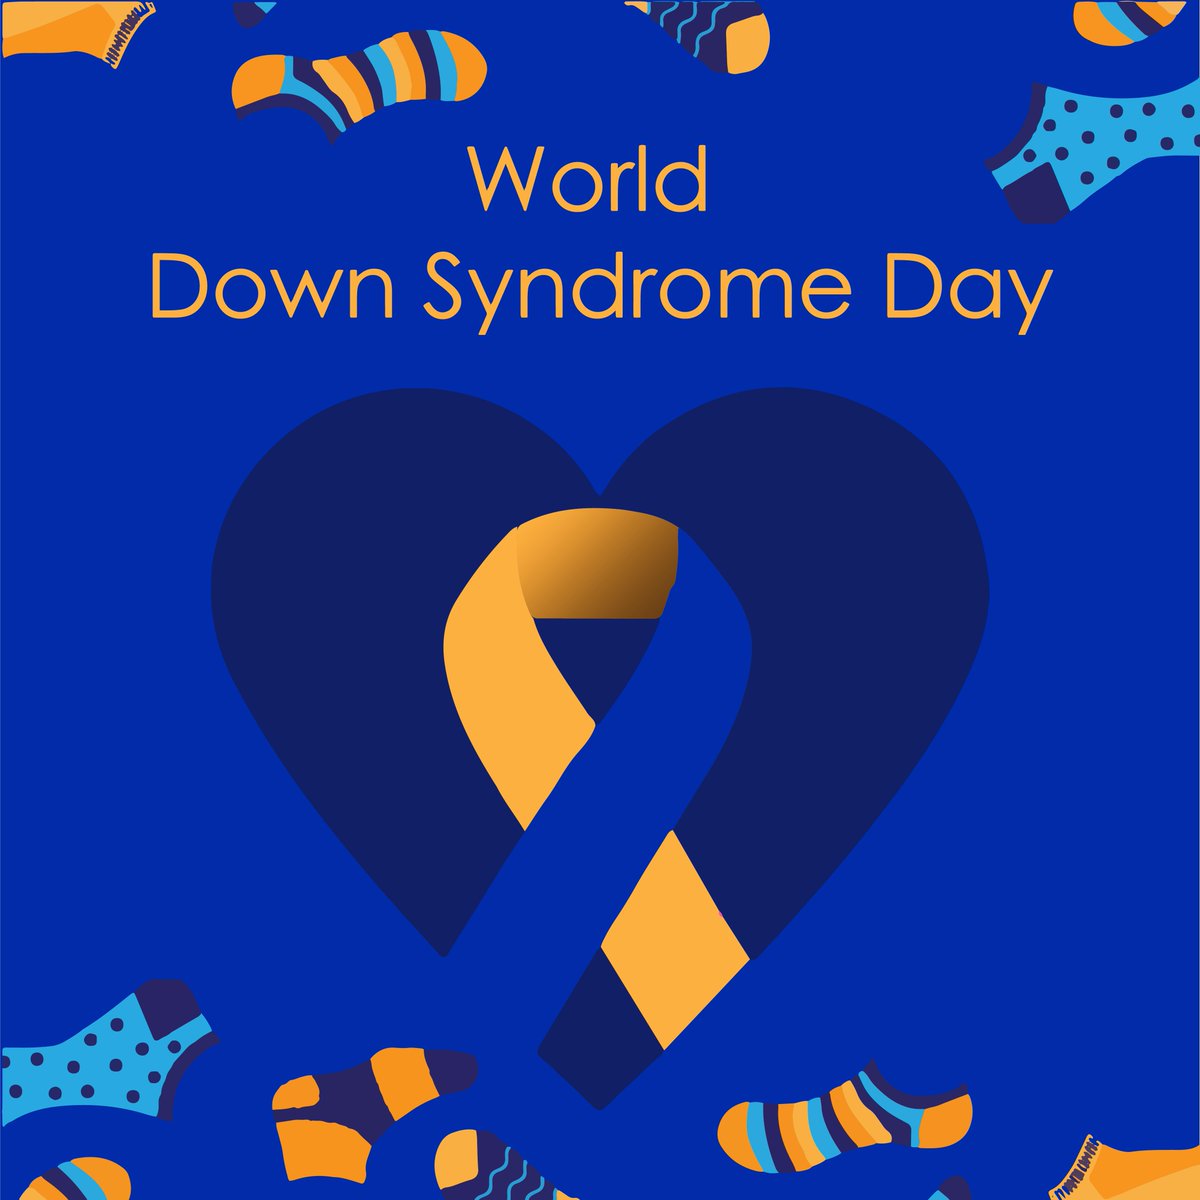 We are more a like, than we are different.

#WorldDownSyndromeDay #downsyndrome
#worldwithoutdowns #lotsofsocks #rockyoursocks #socks #diveristy #ChromosomallyEnhanced #peopleareawesome
#neurodiversity #inclusion #disability #lifeisbetterwithyou
#WSDS #wdsd19 #quote #love #life